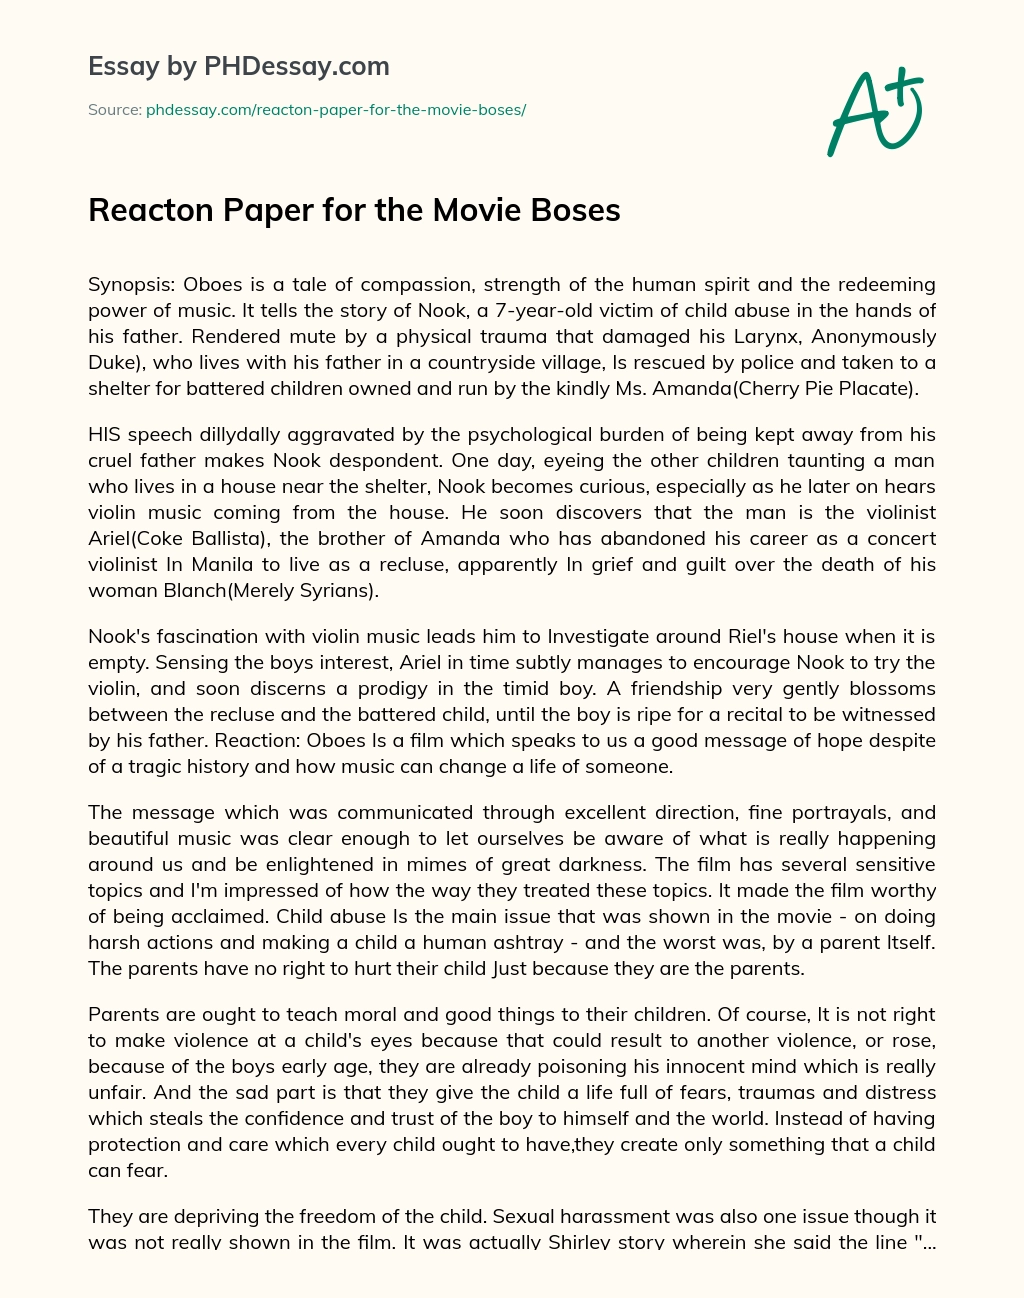 Reacton Paper for the Movie Boses essay